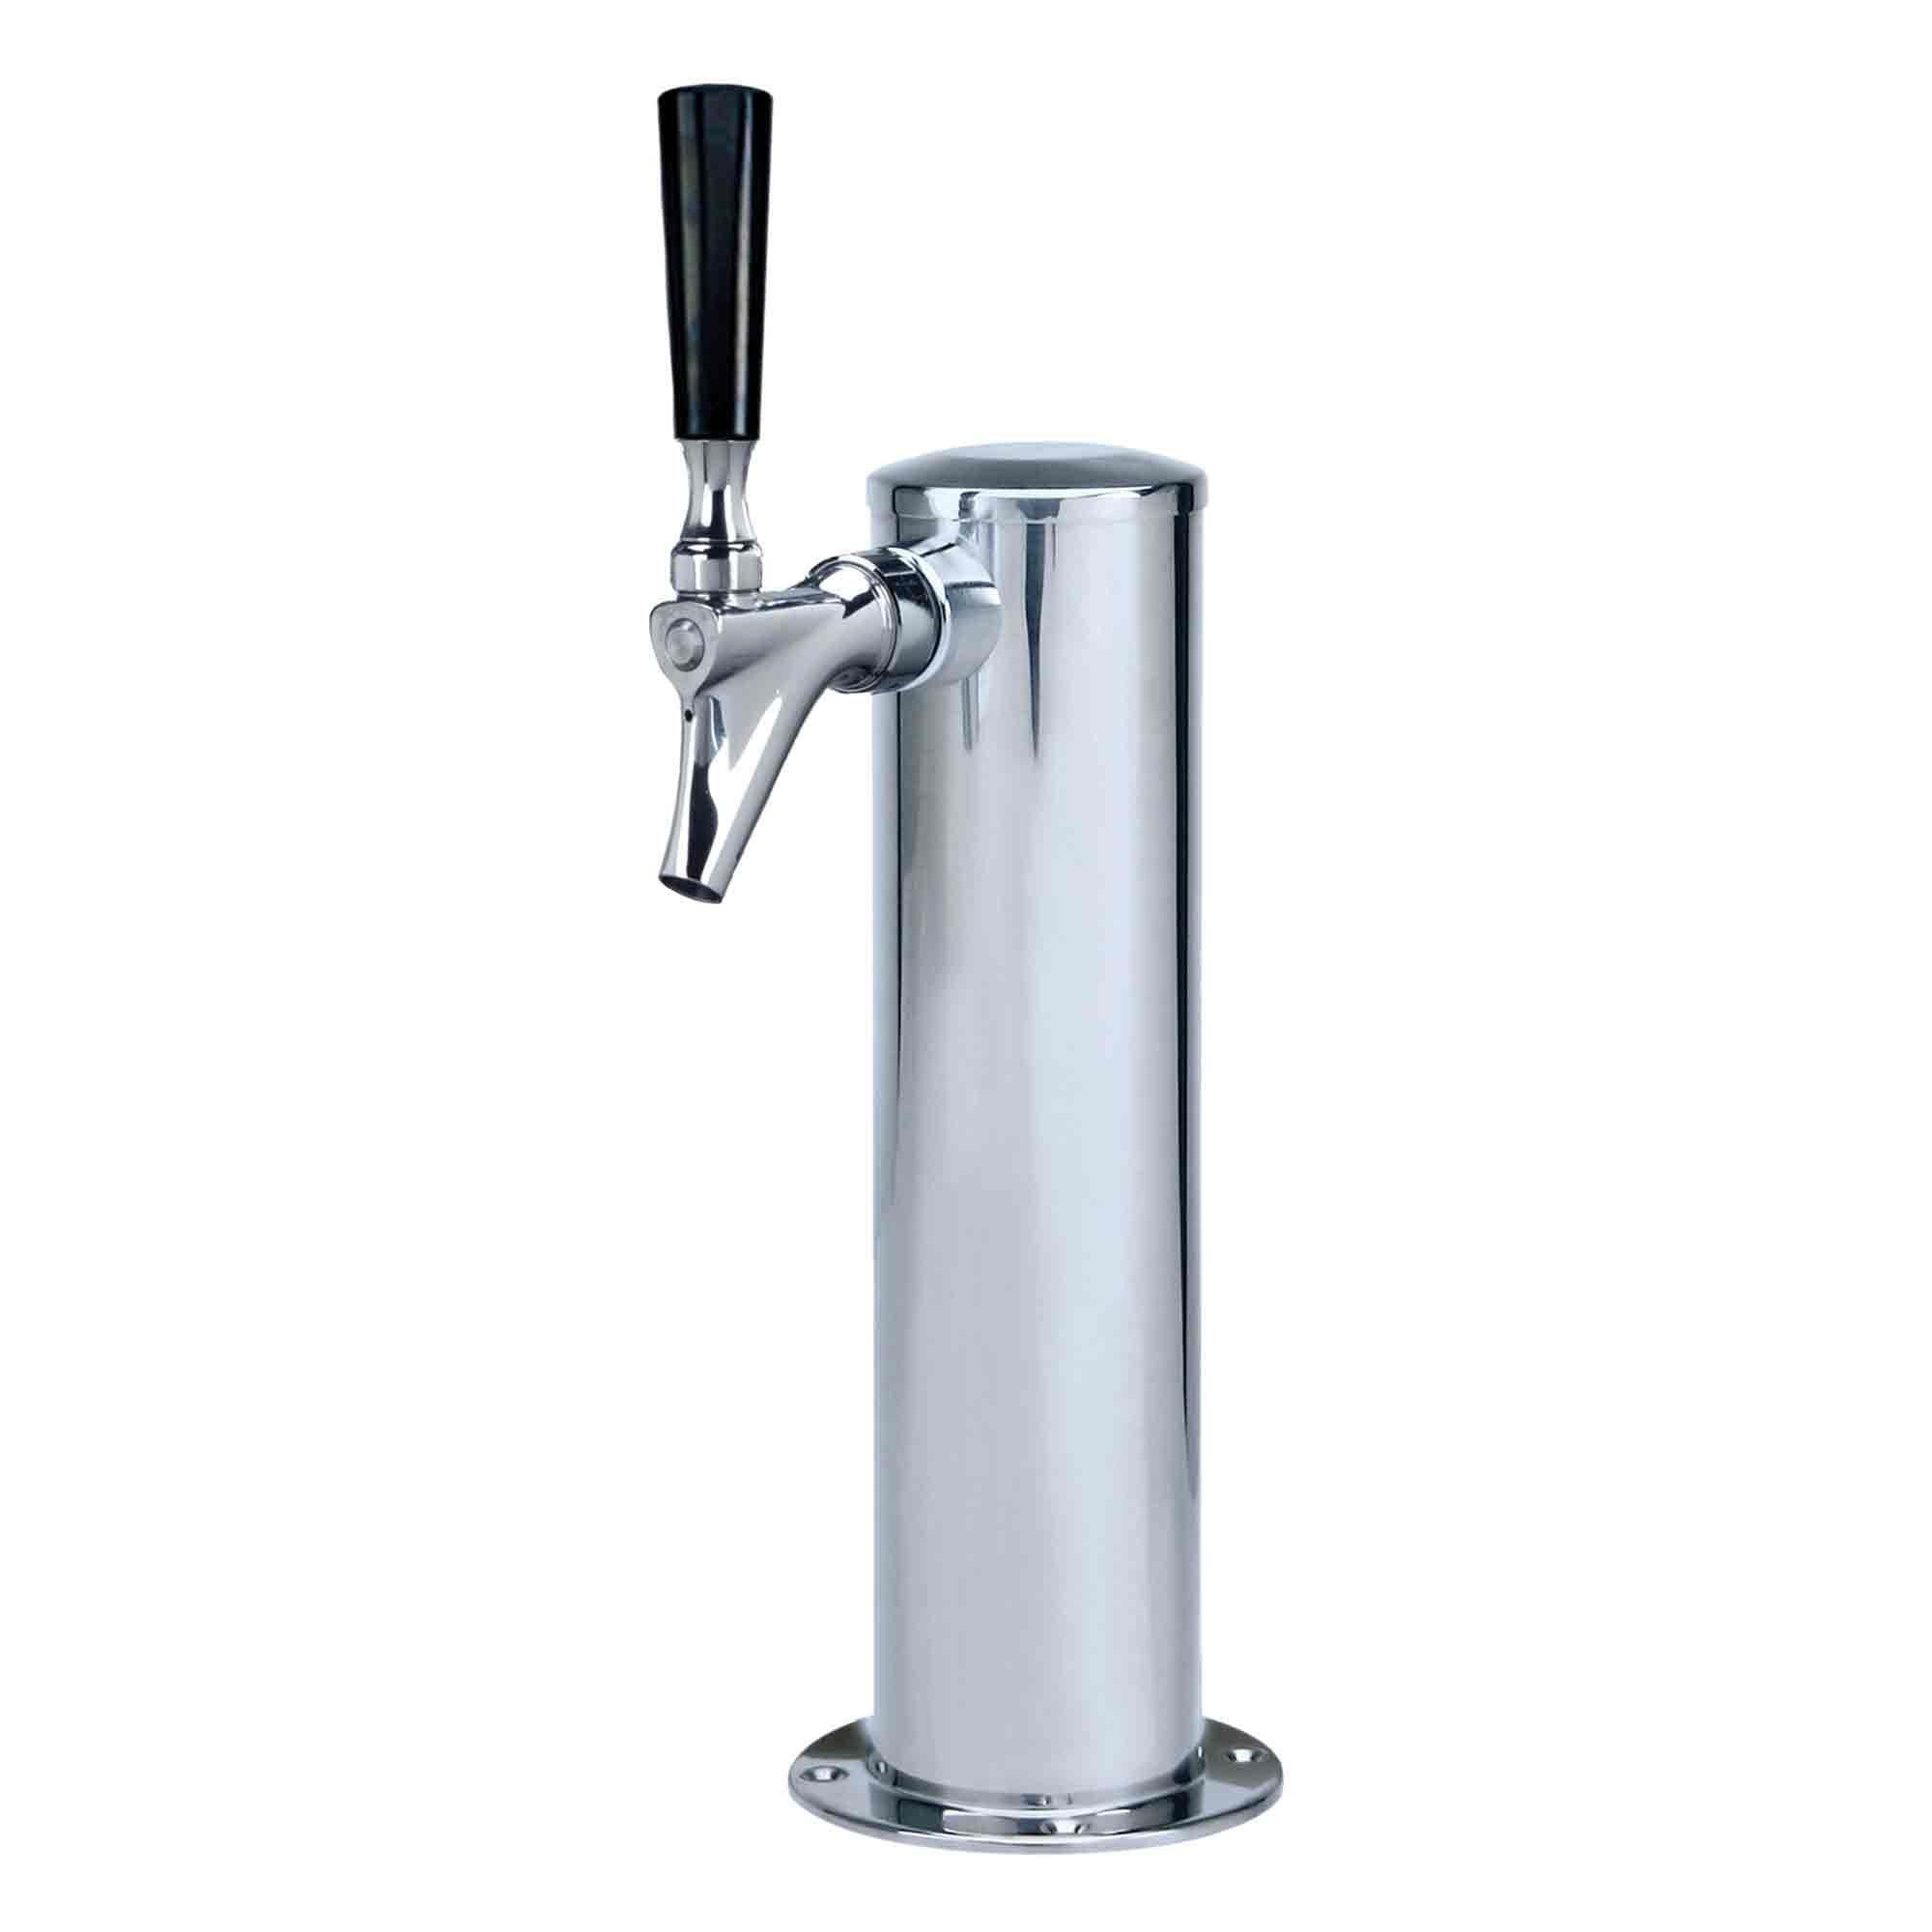 Marvel MOKR124SS31A 24-In Outdoor Built-In Dispenser For Beer, Wine Or Draft Beverages With Door Style - Stainless Steel